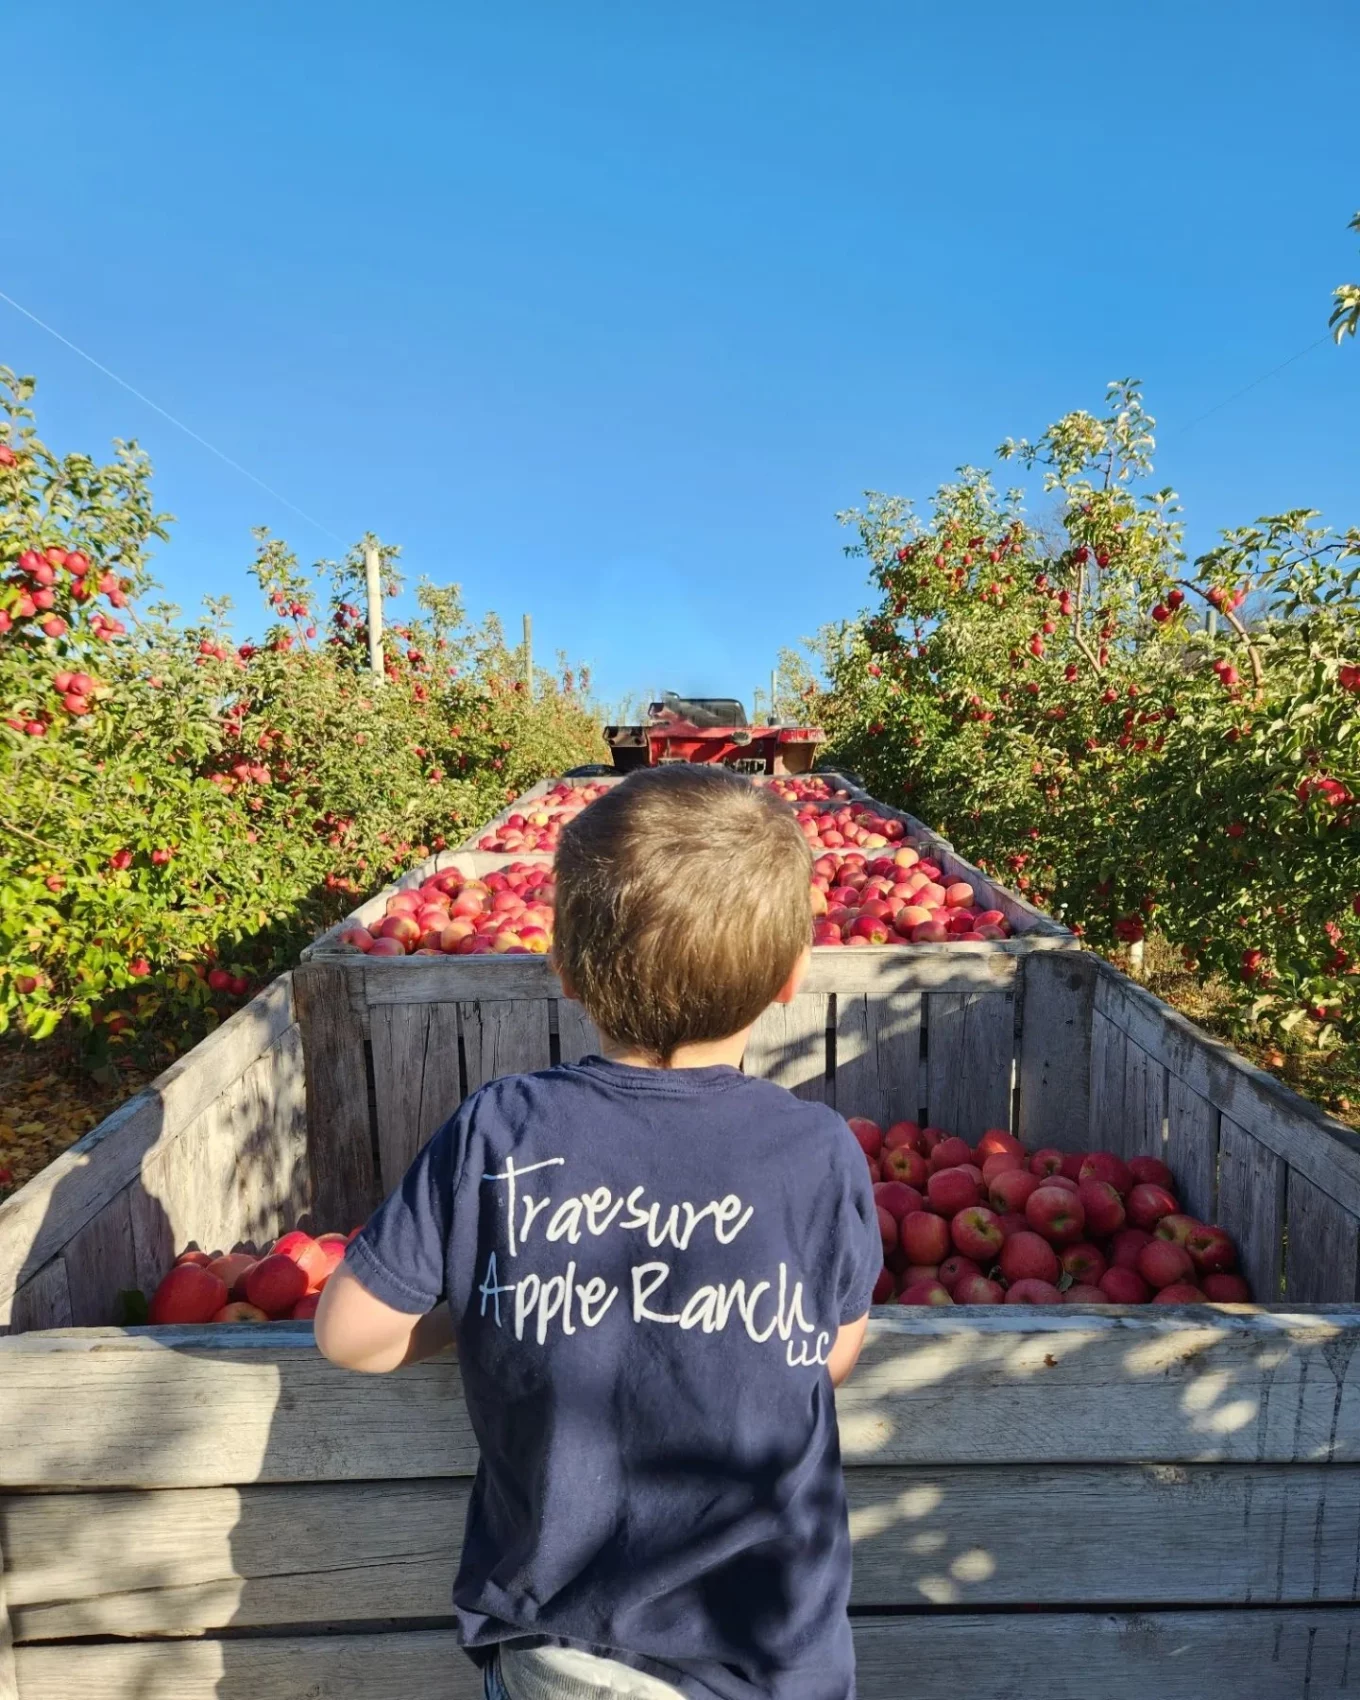 Boy looks over apple bins in orchard